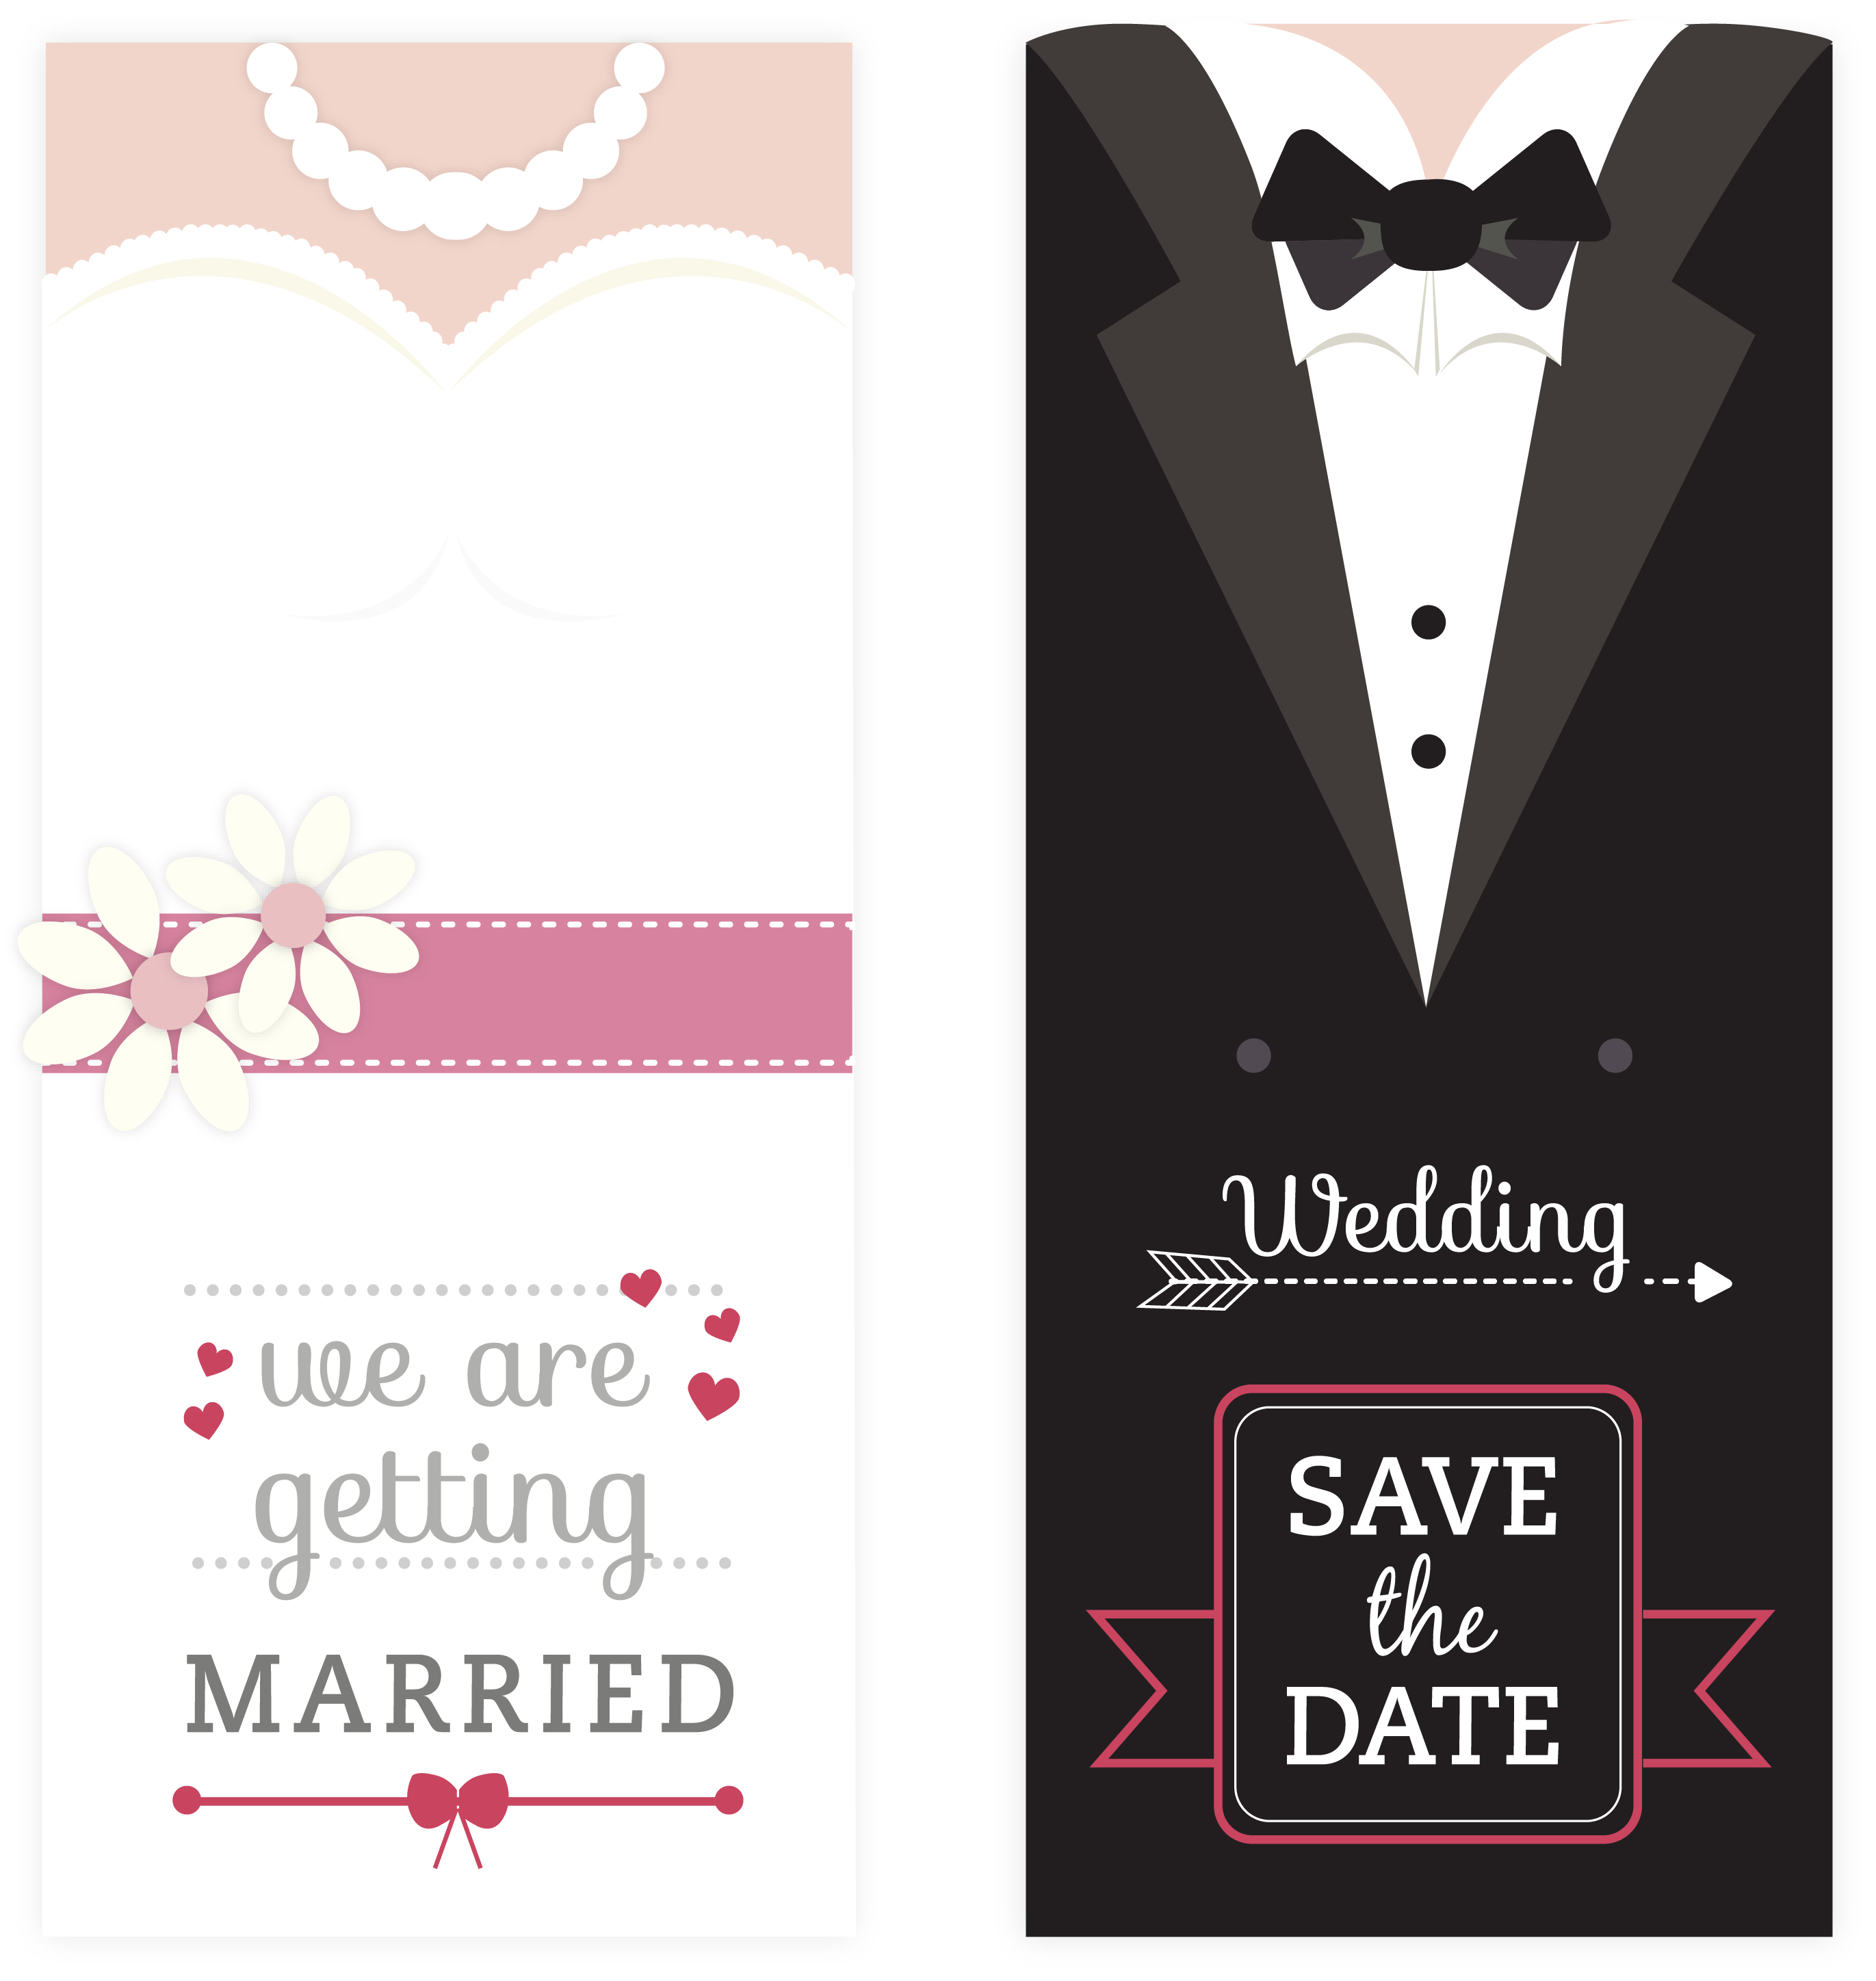 Wedding Envelope Invitation Date The Save Card Clipart